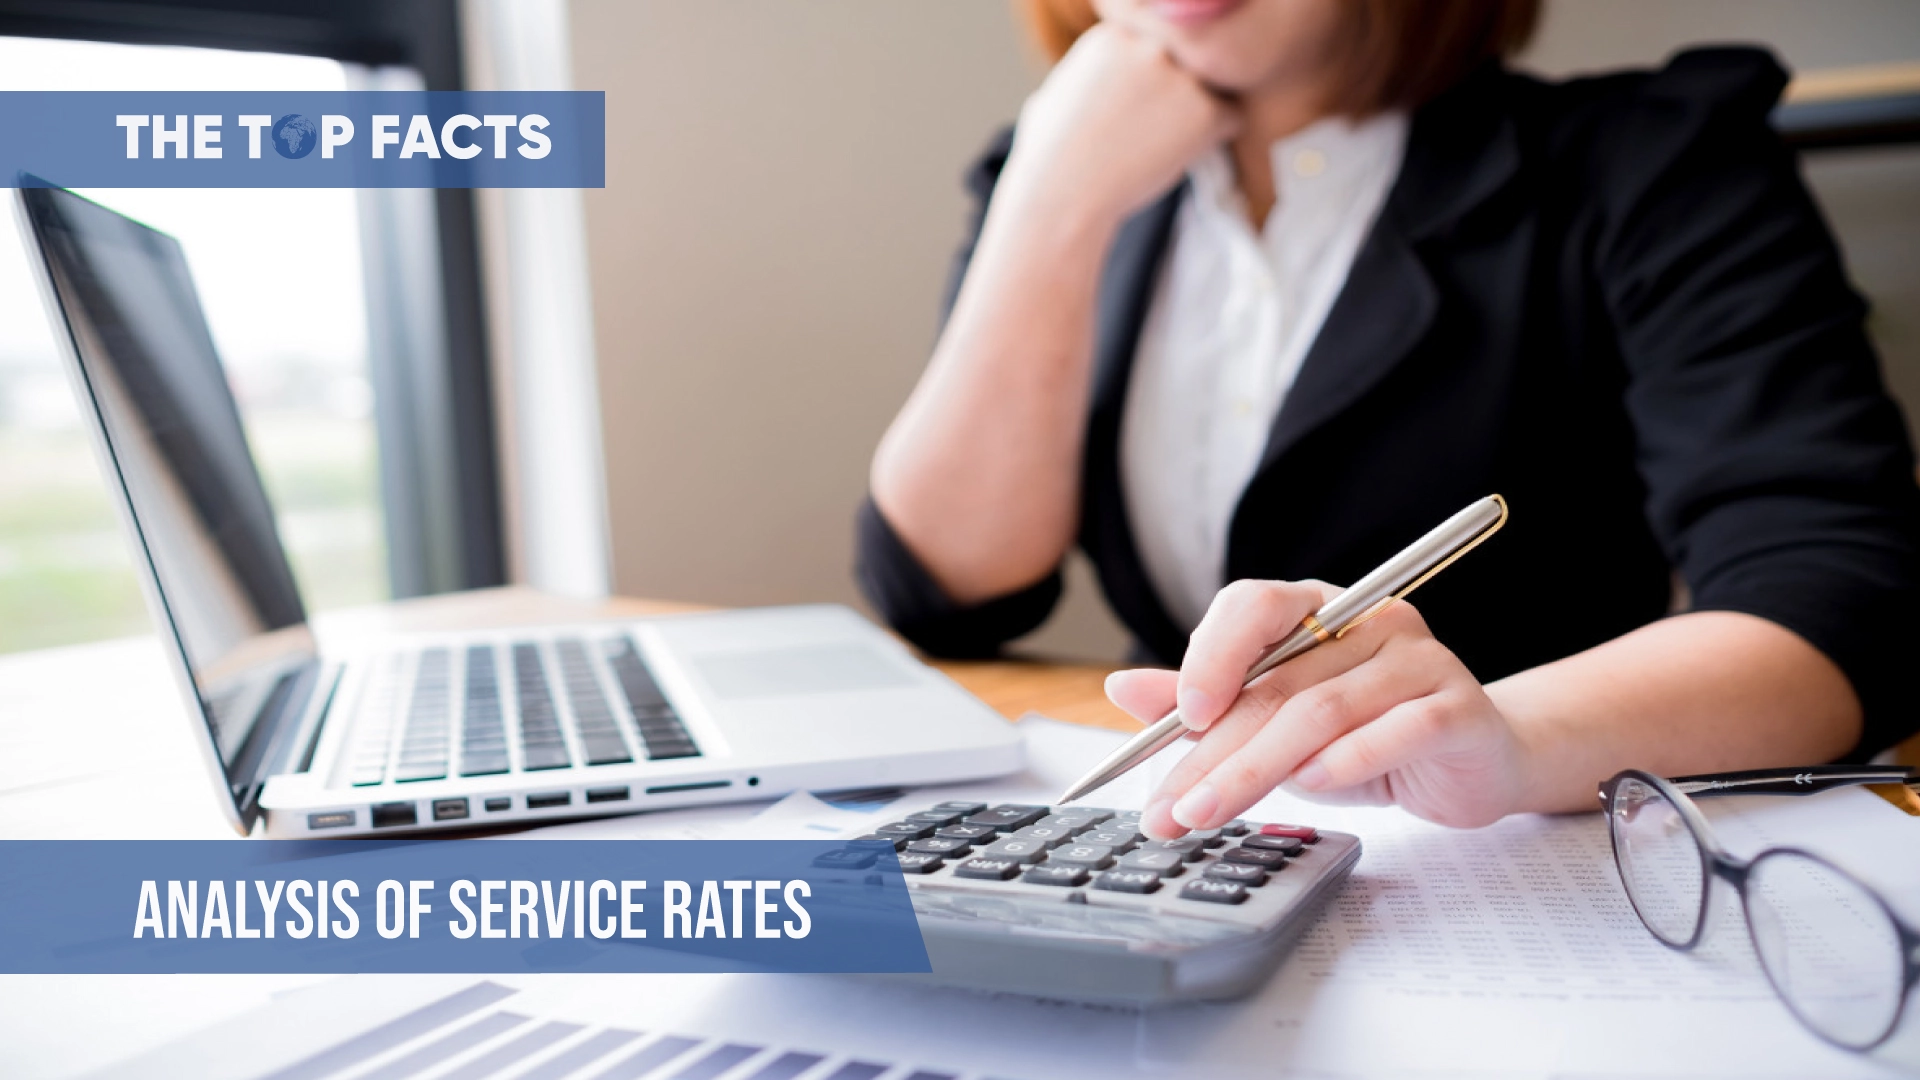 Analysis of service rates